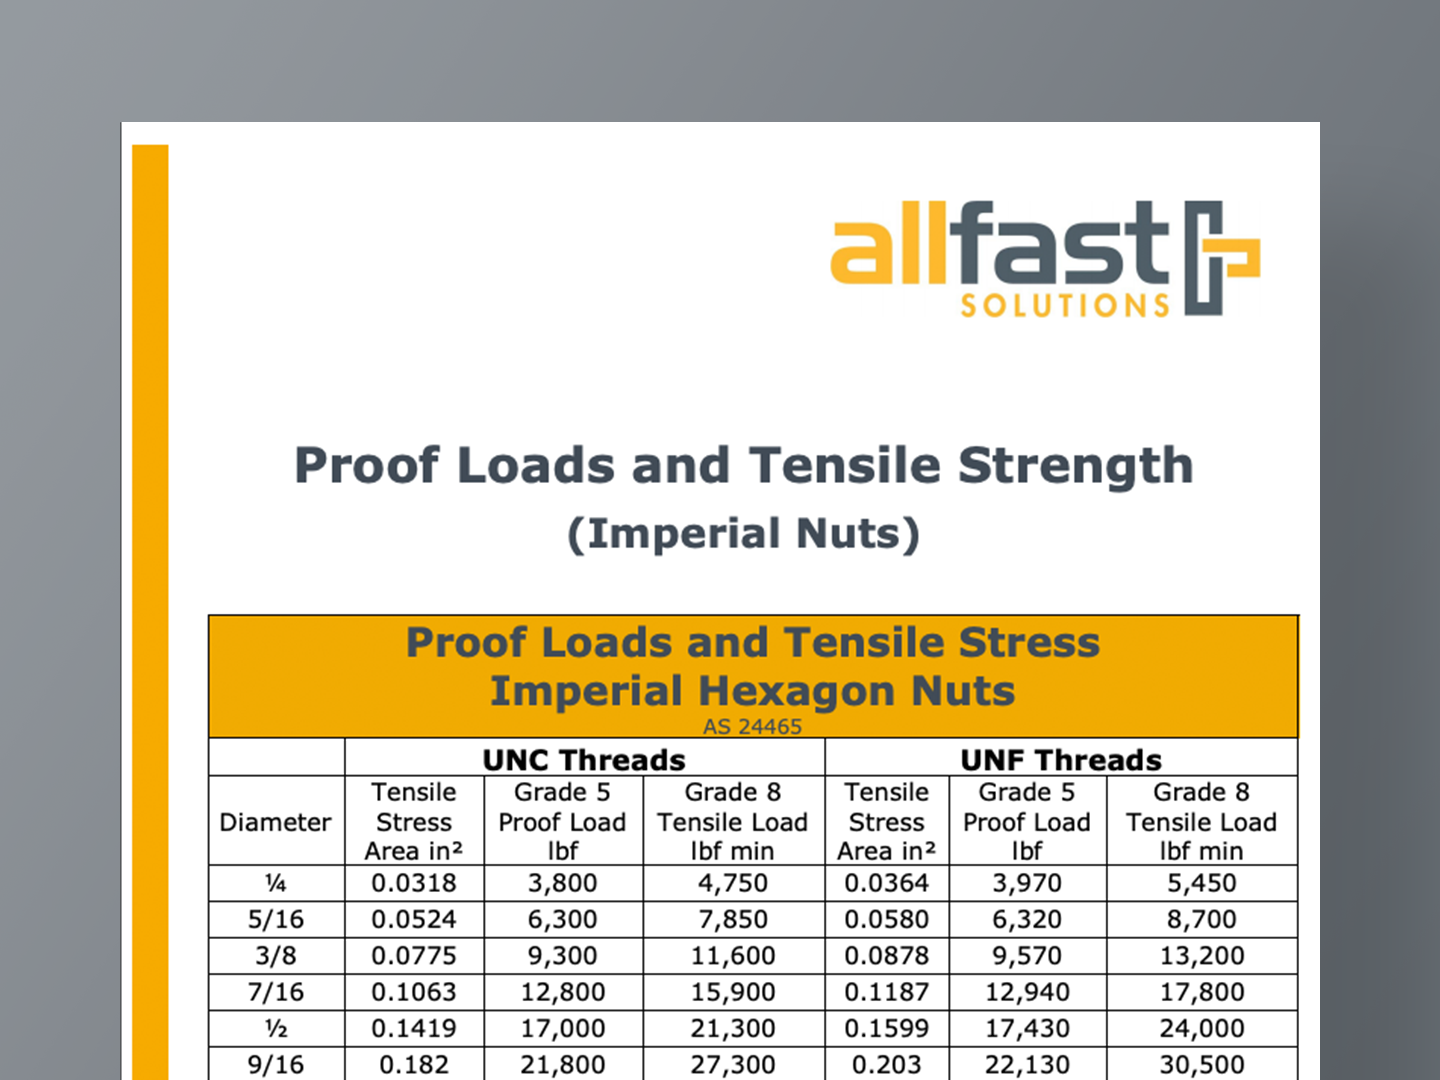 Proof Loads & Tensile Strength (Imperial Nuts)